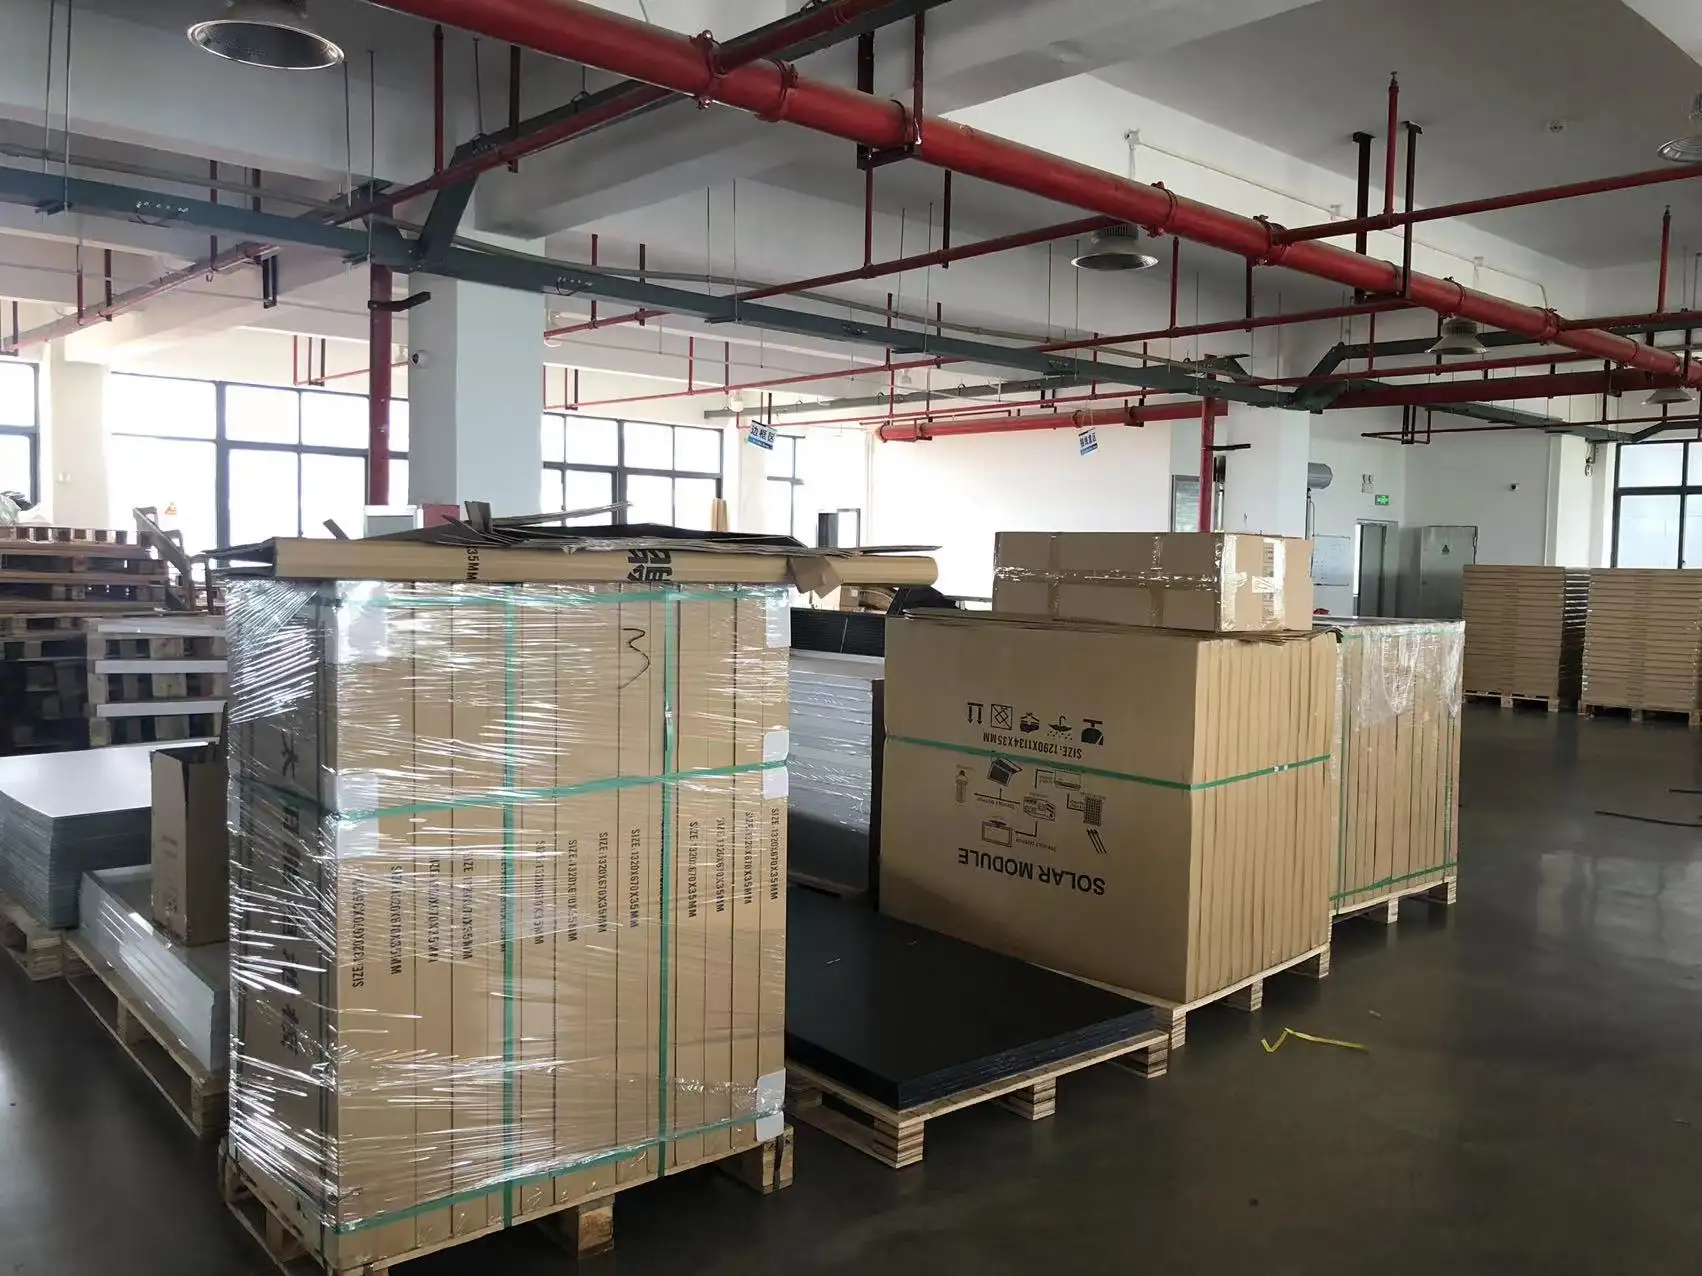 1KW 3KW 5KW 8KW 10KW 15KW 20KW 25KW 30KW PV Panels Solar Panel System 1500W With Solar Hybrid Inverter LiFePO4 Battery Pack